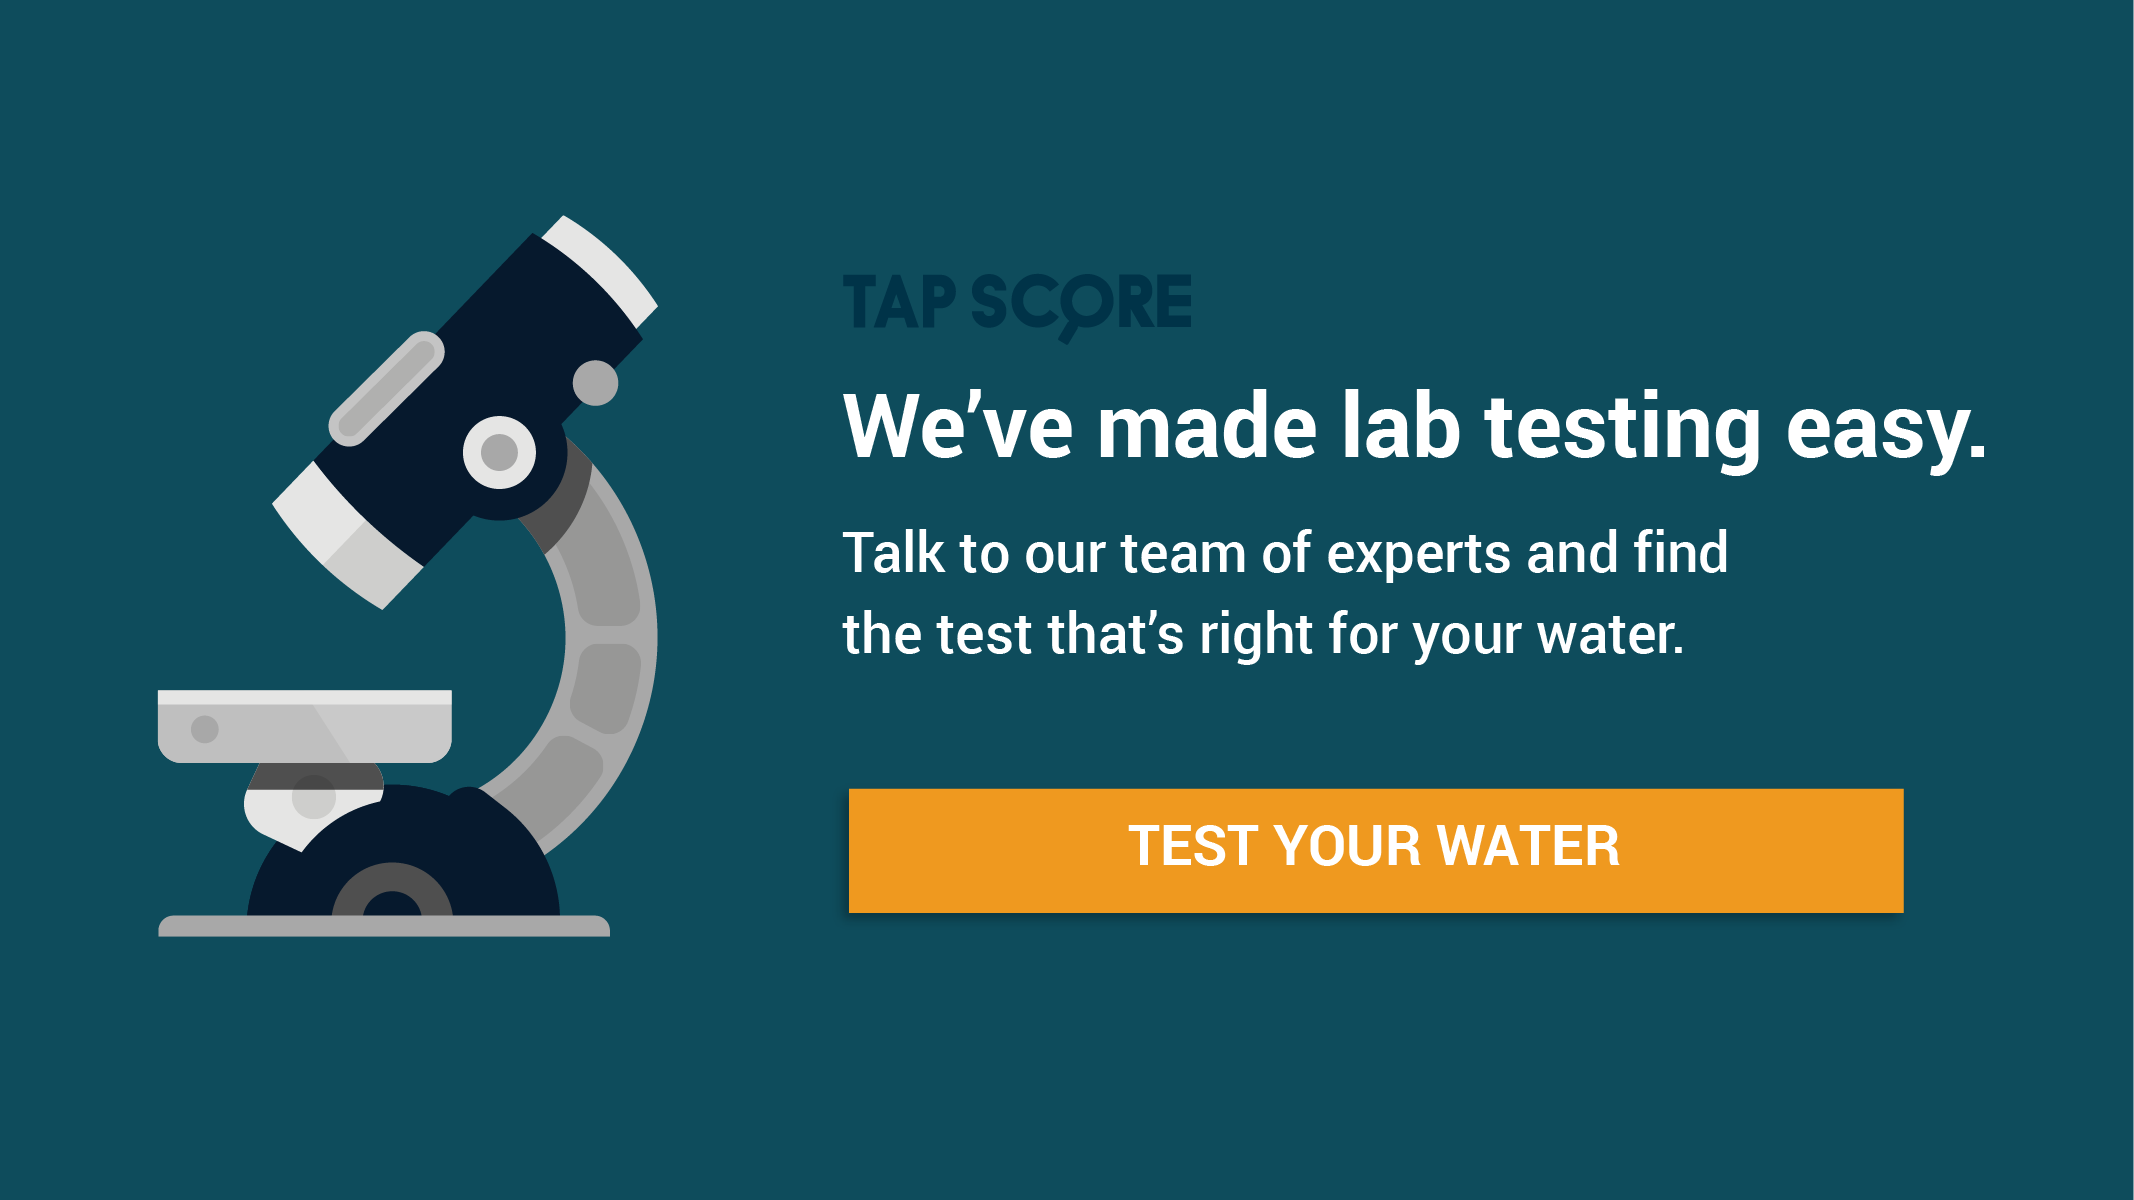 Test Your Water with Tap Score